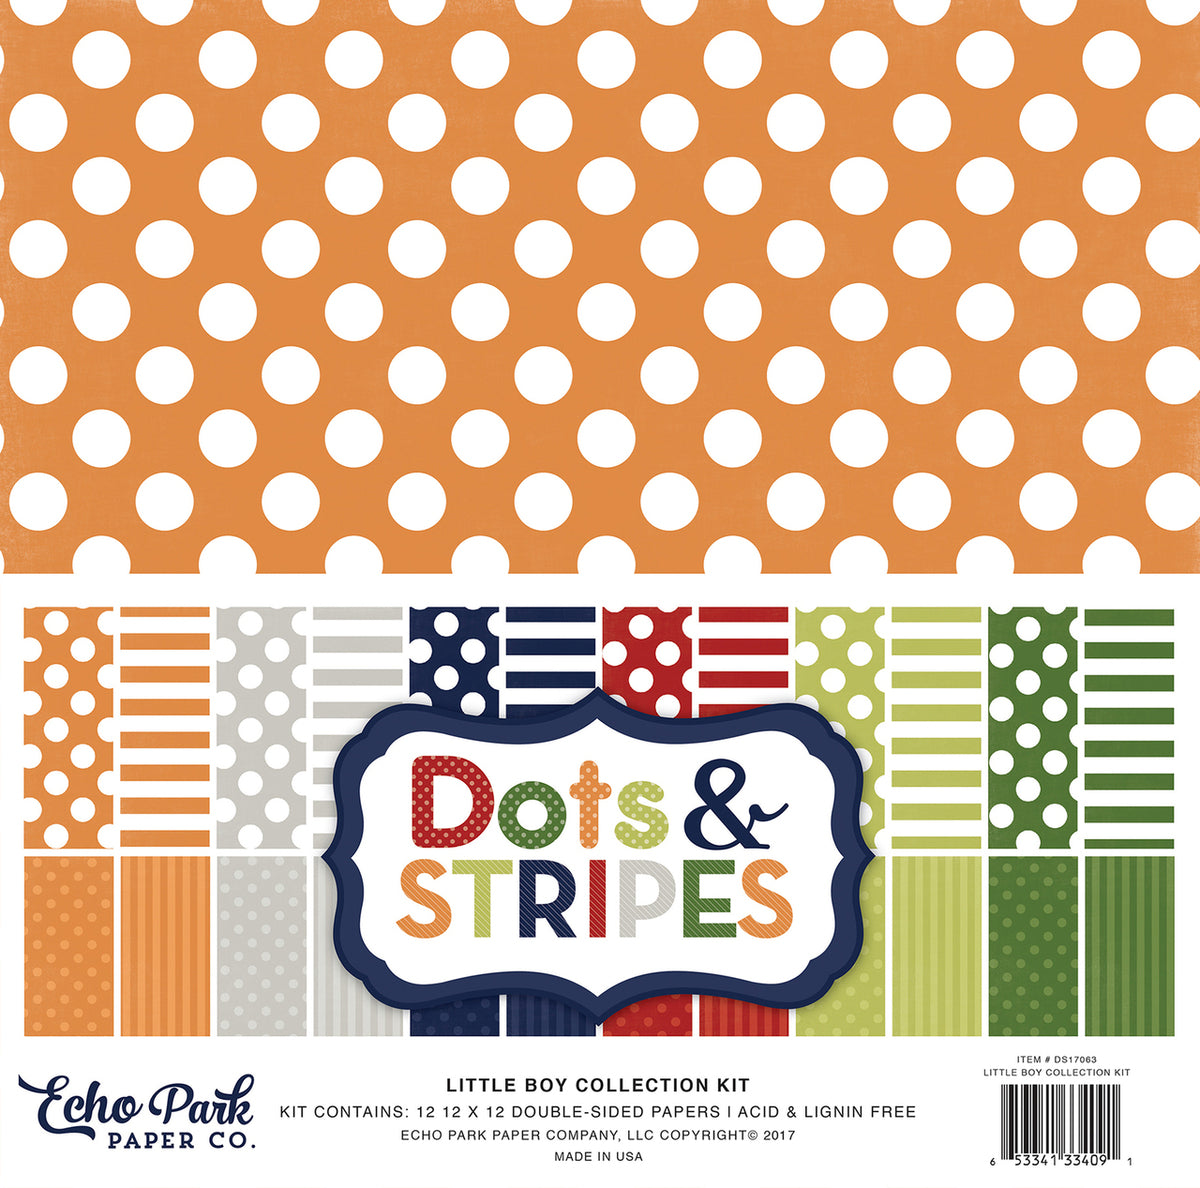 Little Boy Dots and Stripes has 12 unique patterned papers in colors reminiscent of boys - Echo Park Paper